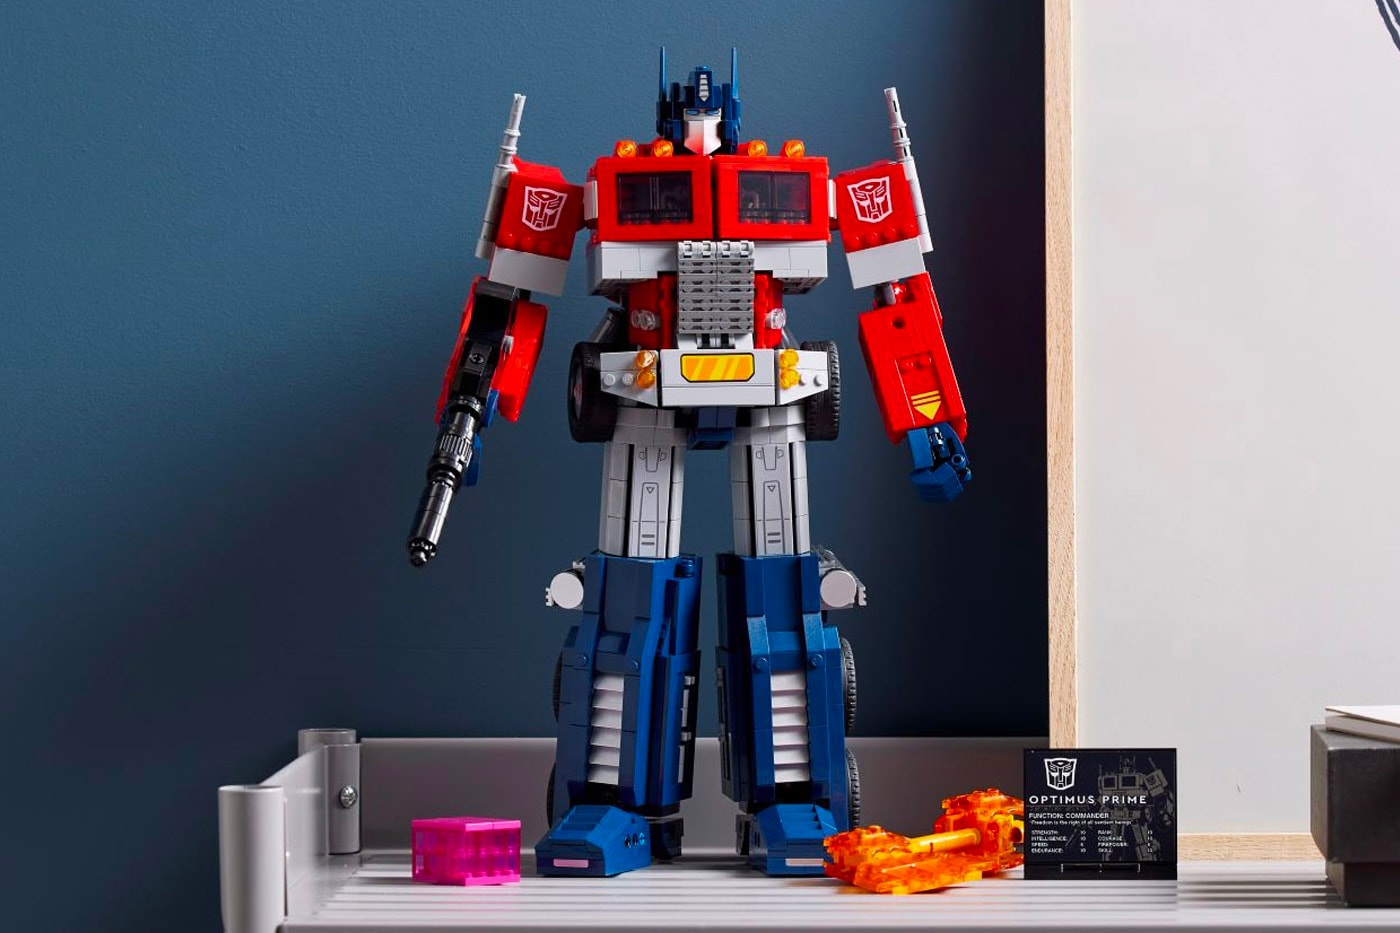 LEGO Optimus Prime transformers 19 points of articulation autobot dimensions ion blaster matrix of leadership energon axe cube jetpack release info date price 